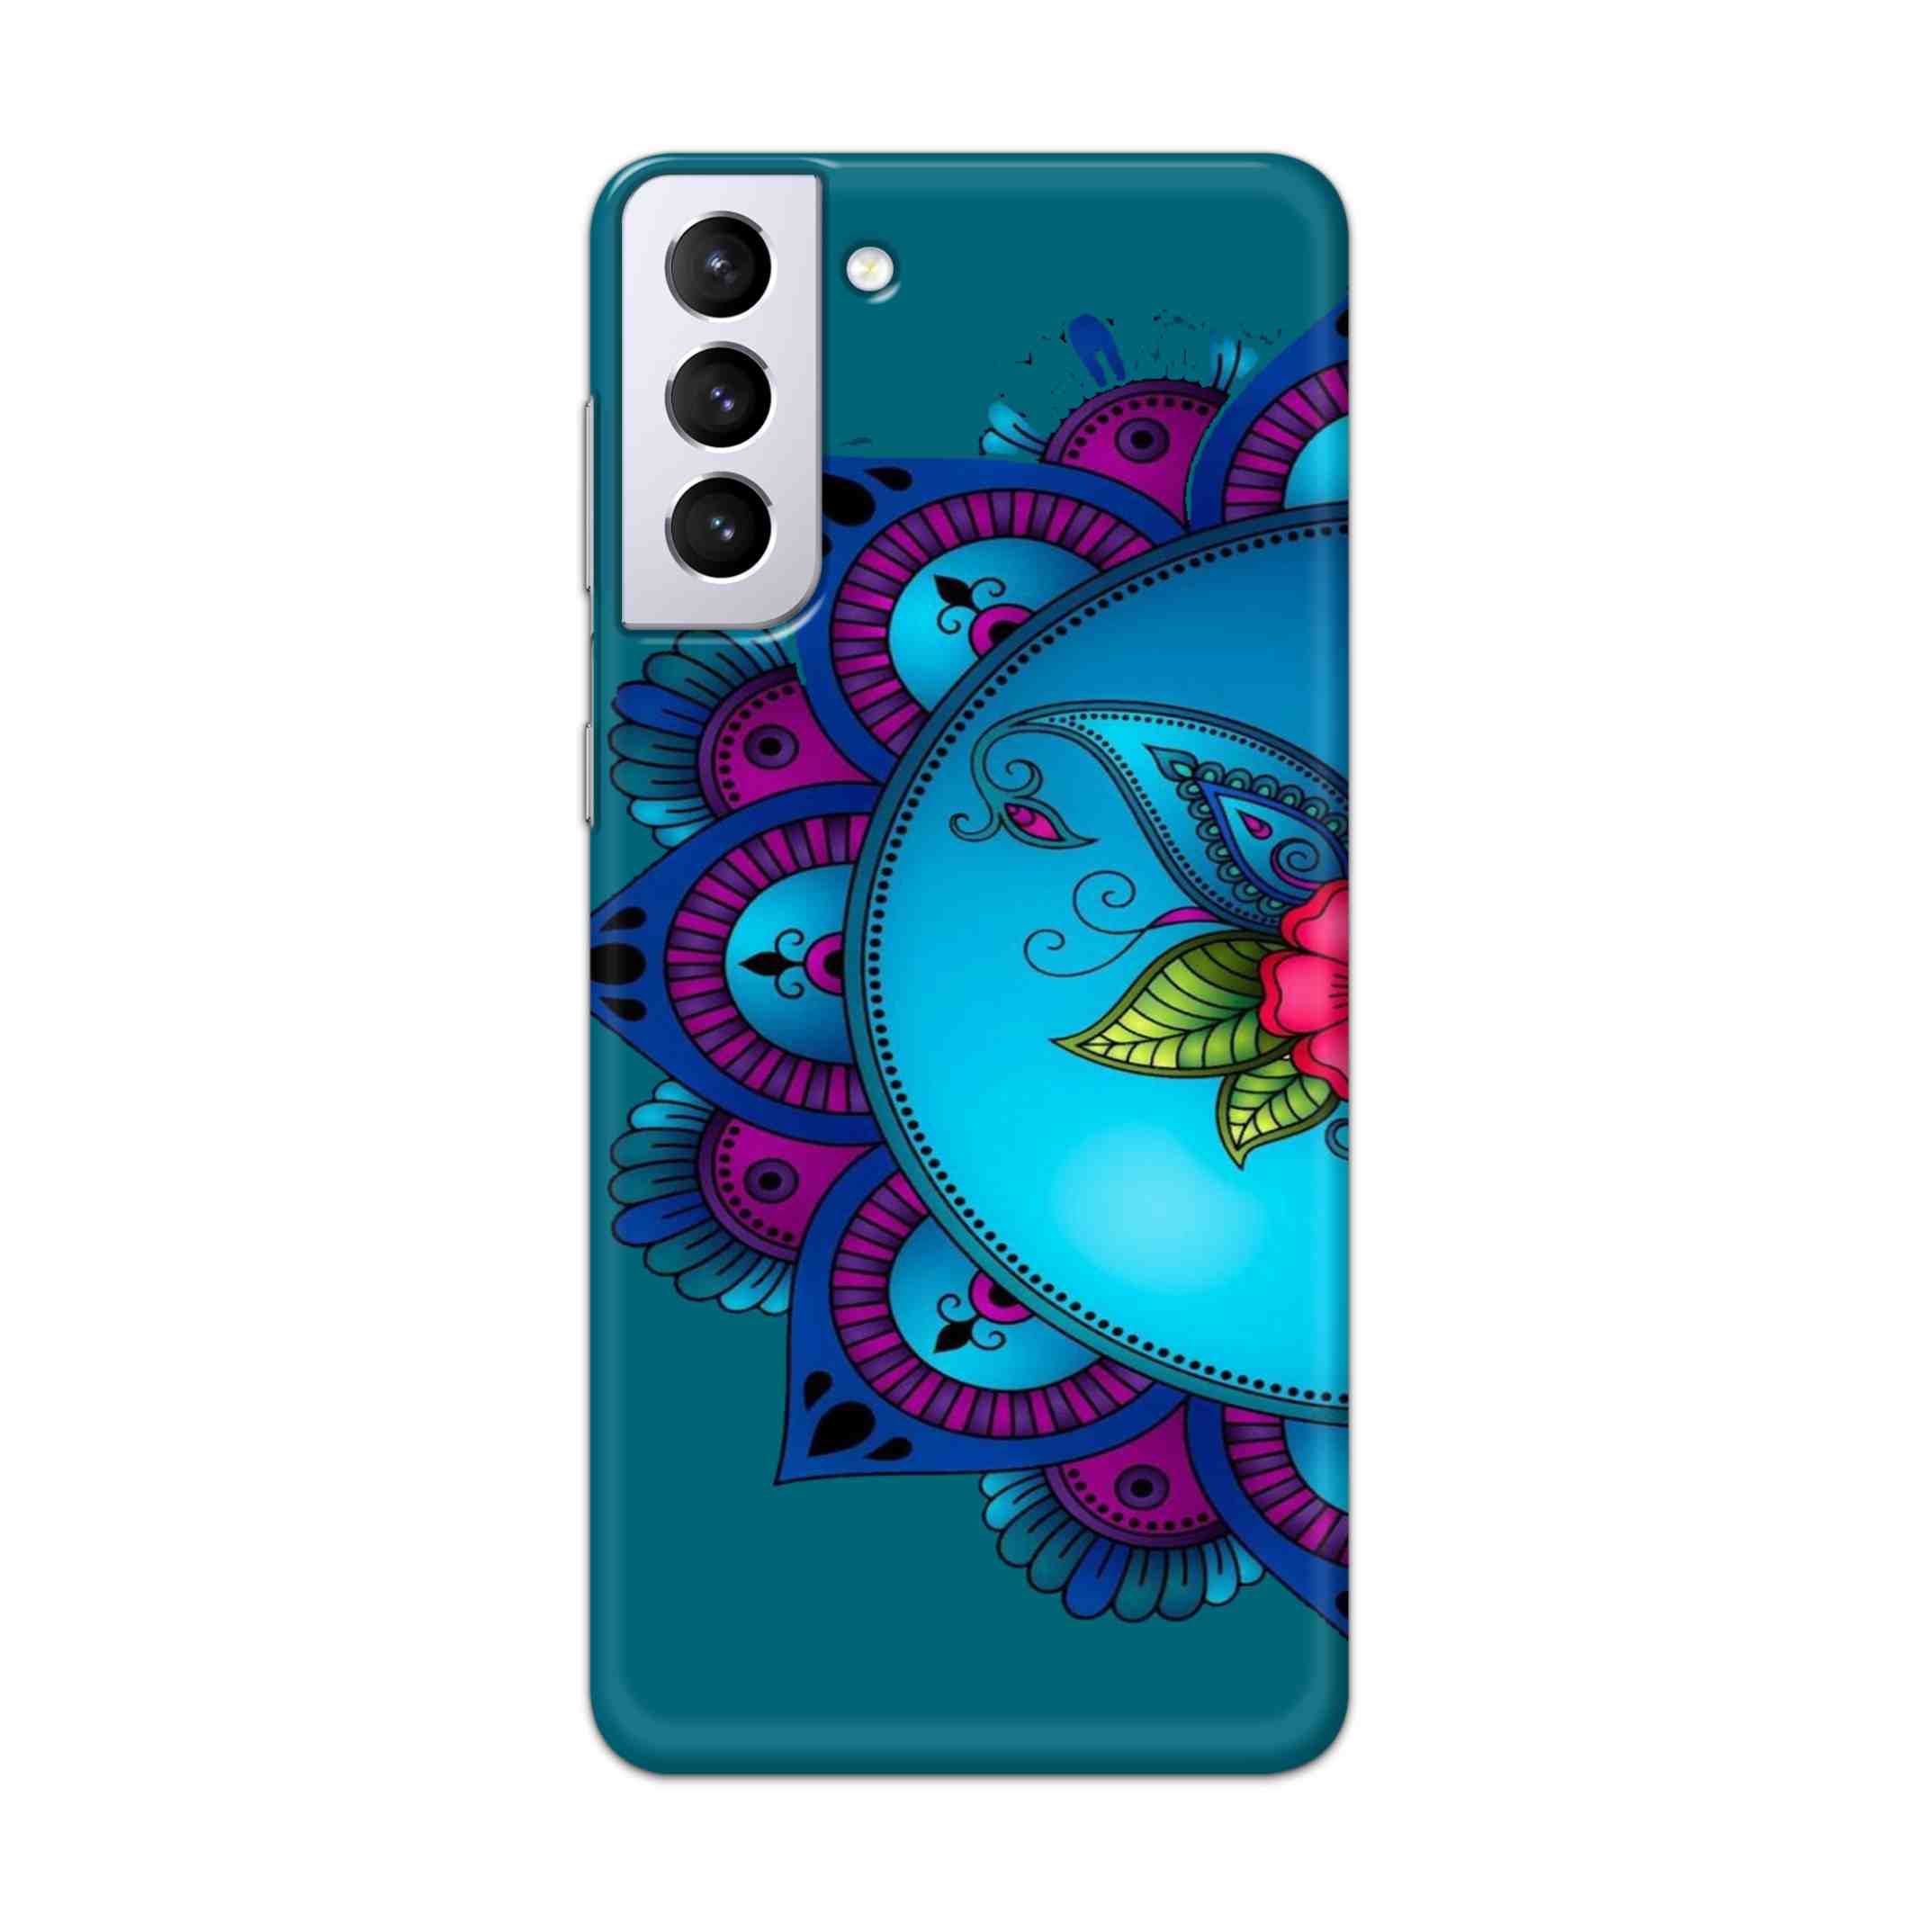 Buy Star Mandala Hard Back Mobile Phone Case Cover For Samsung Galaxy S21 Plus Online